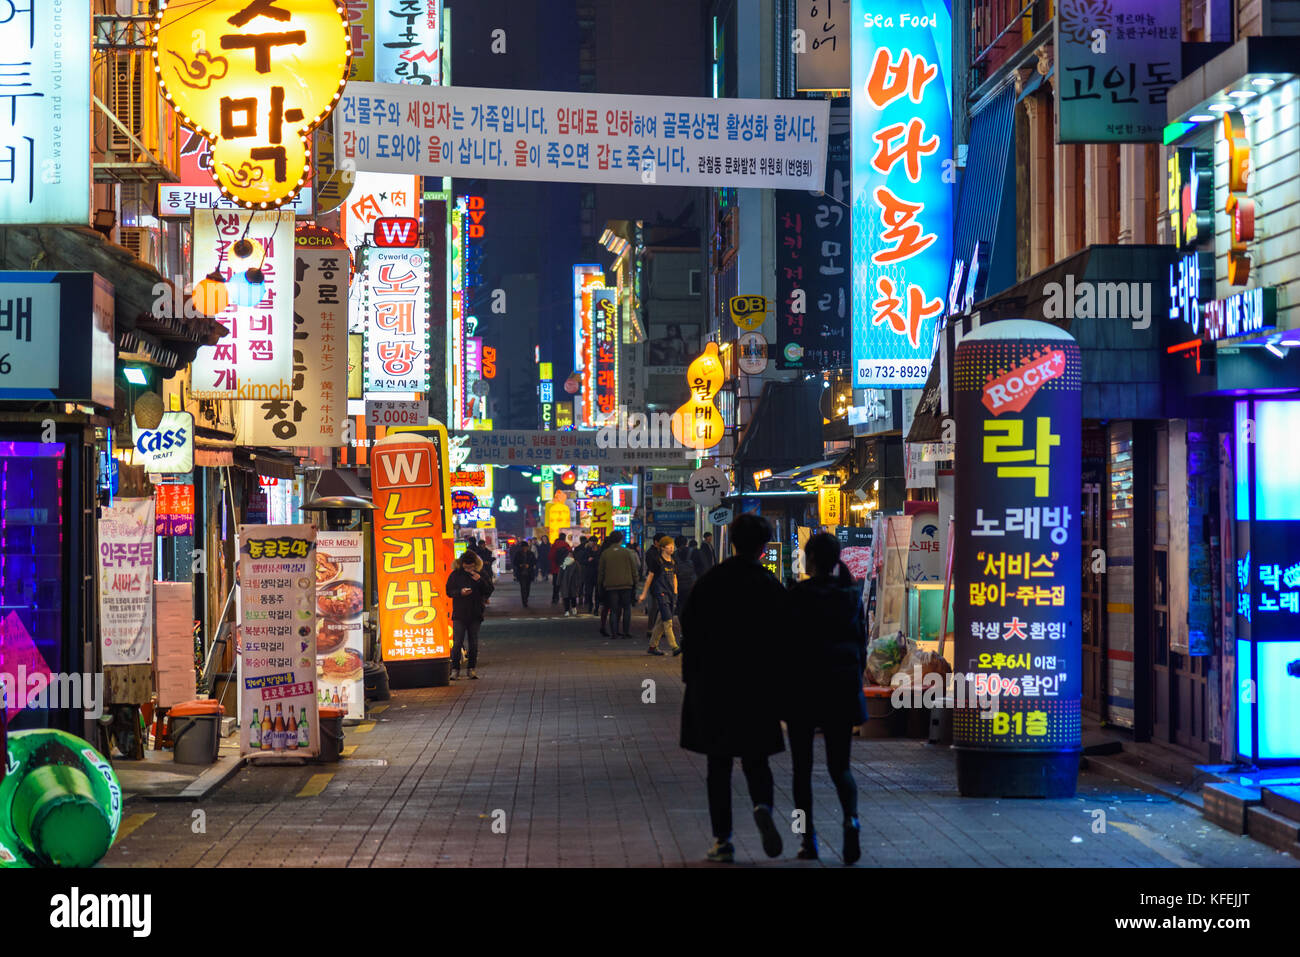 SEOUL, SOUTH KOREA - JANUARY 1, 2017 - Night view of a street near Insadong district in Seoul Stock Photo